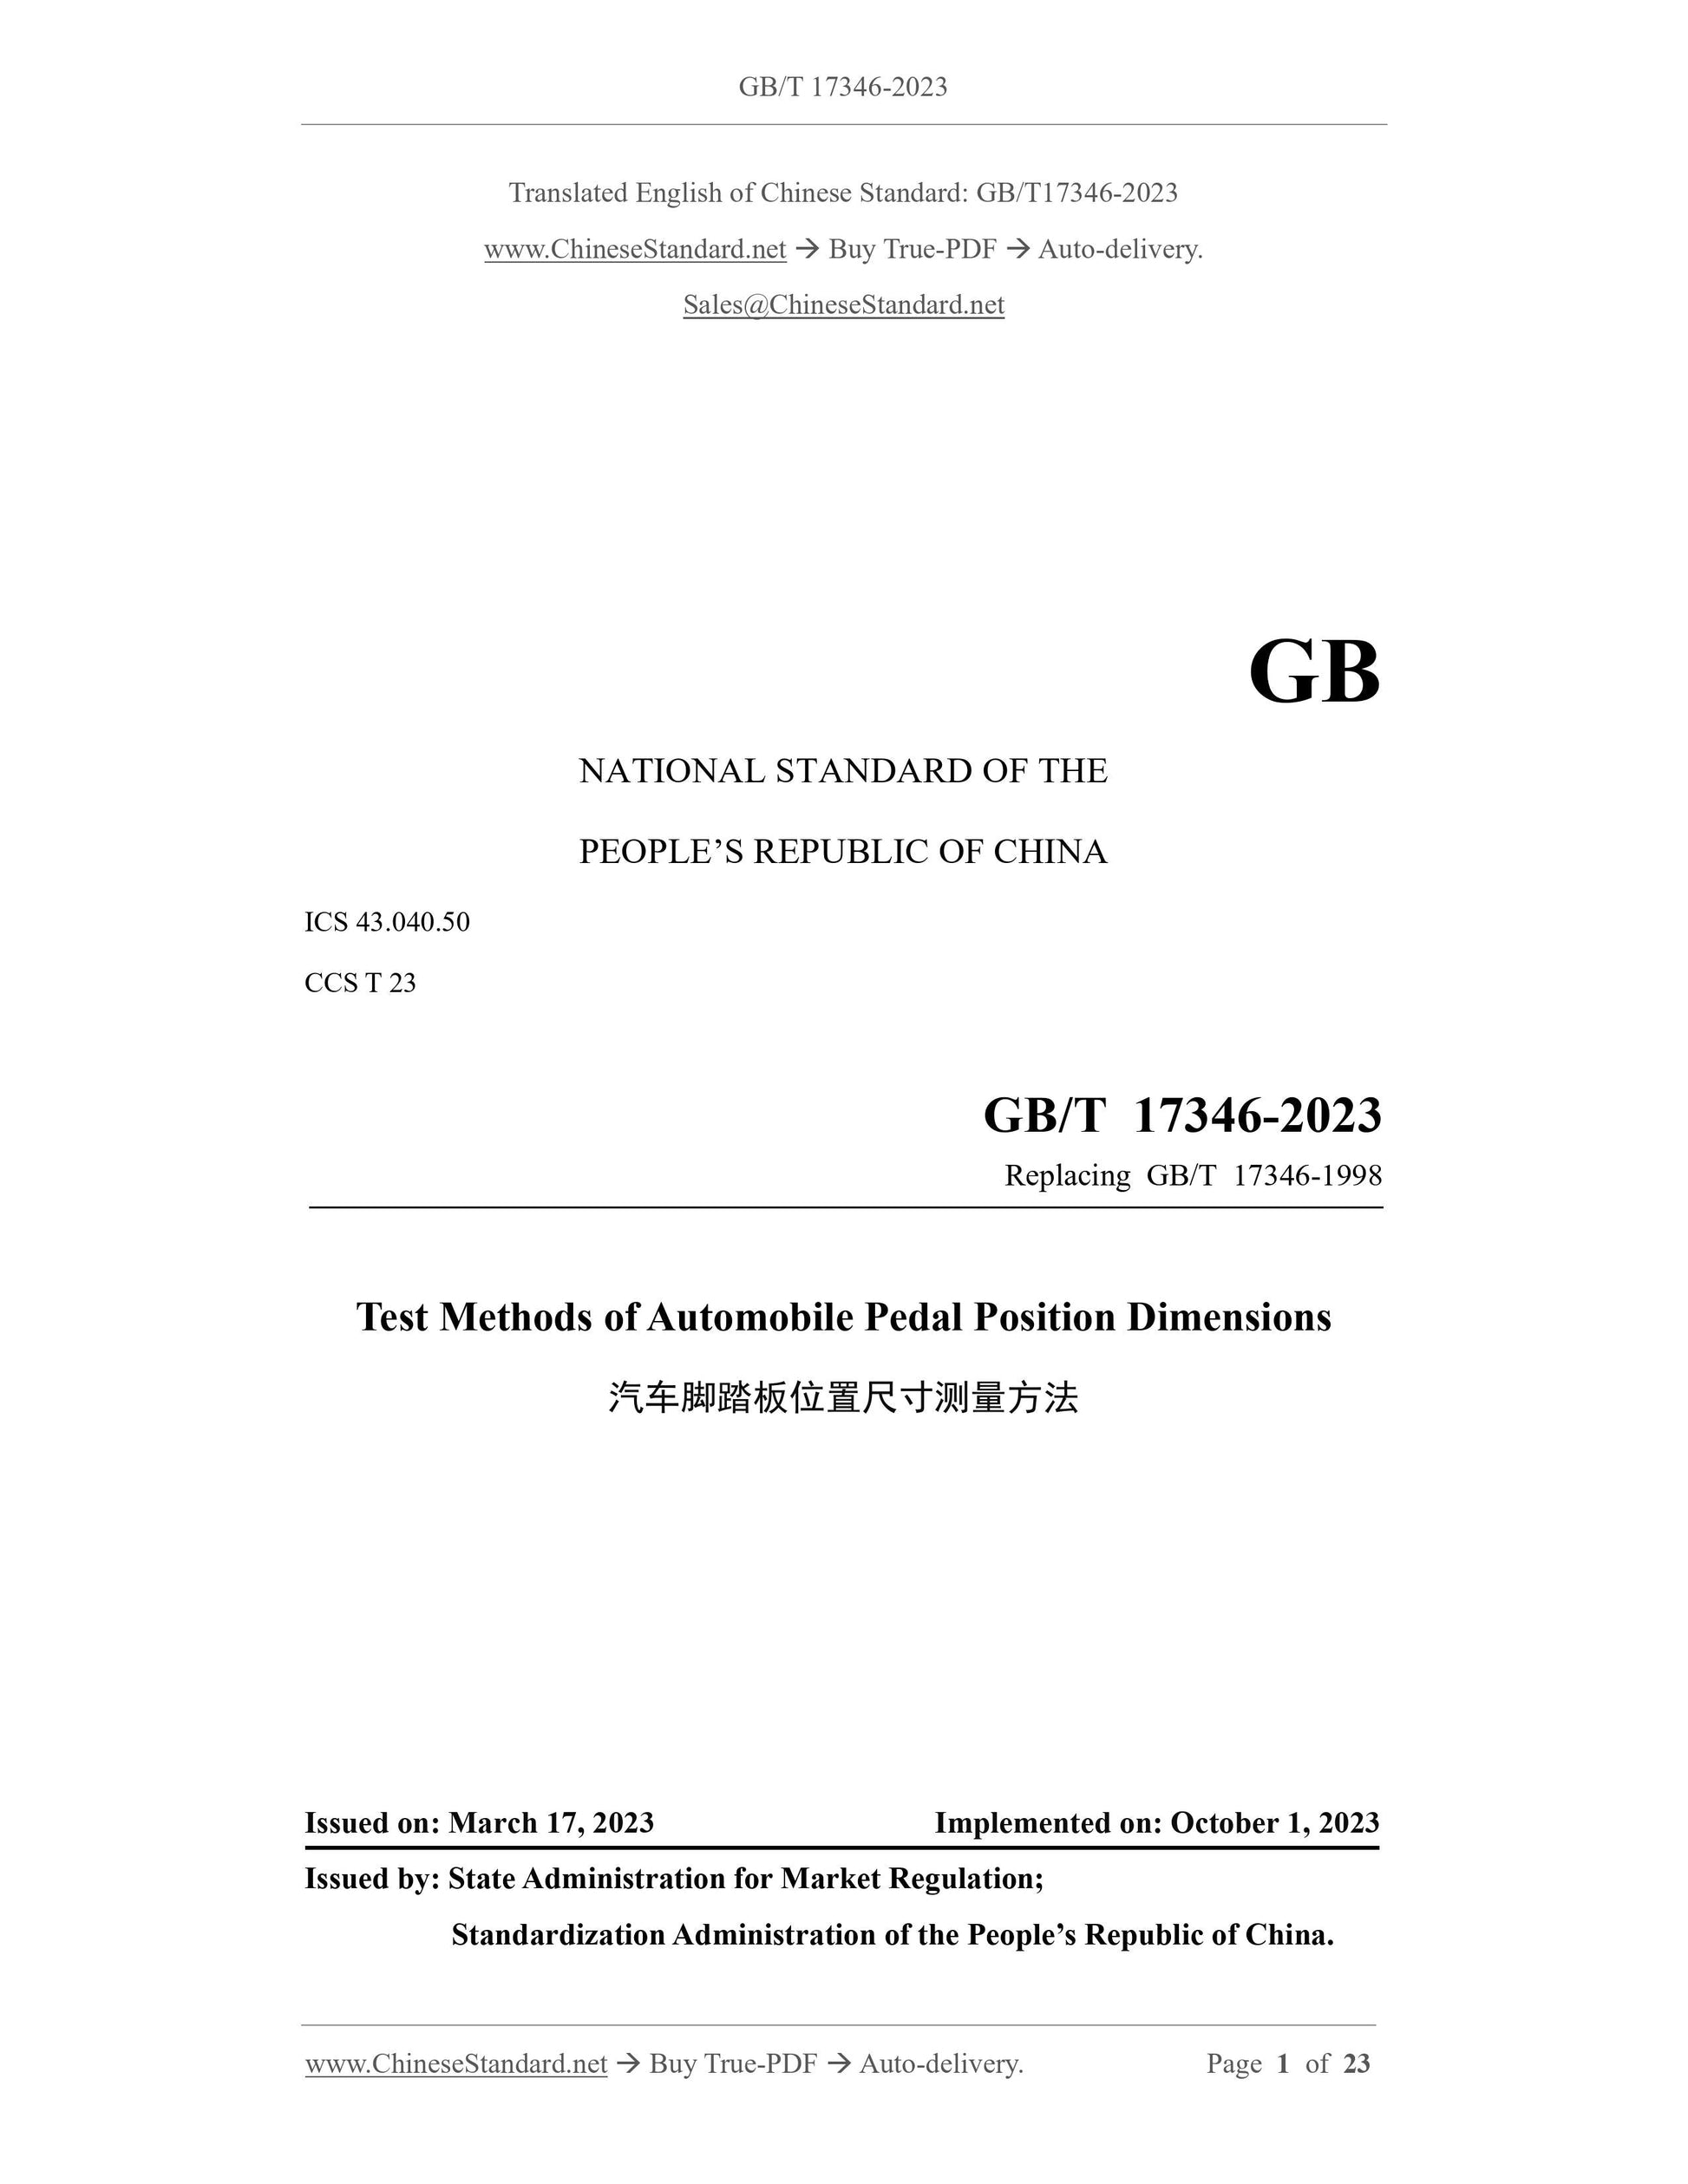 GB/T 17346-2023 Page 1